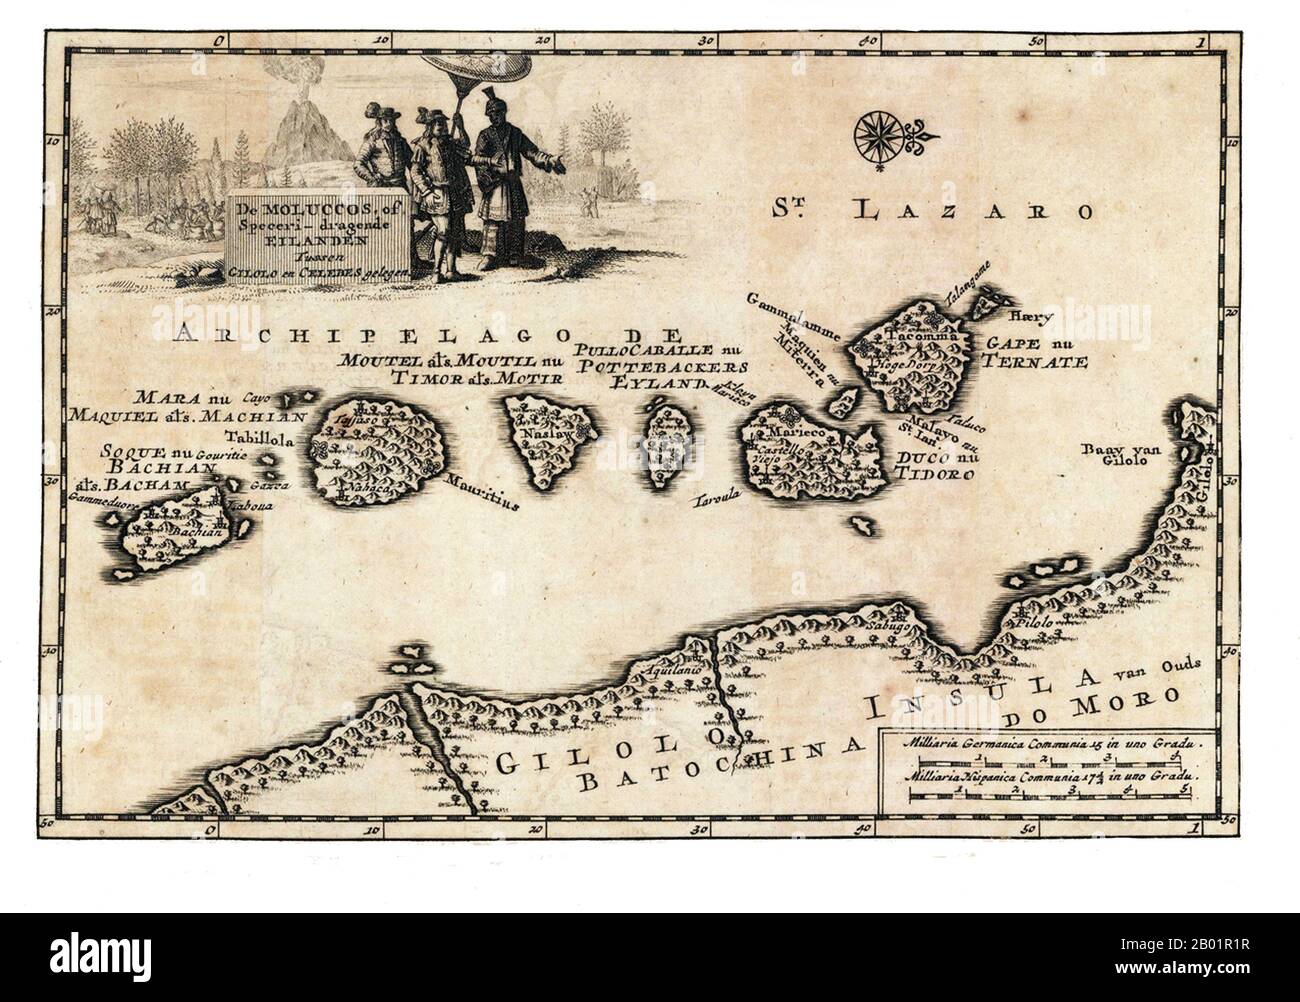 Indonesia/Netherlands: Early map of the Maluku Islands. Copperplate engraving by Pieter Van der Aa (1659-1733), c. 1707.  The Maluku Islands (also known as the Moluccas, Moluccan Islands and the Spice Islands) are an archipelago that is part of Indonesia, and part of the larger Maritime Southeast Asia region. Tectonically they are located on the Halmahera Plate within the Molucca Sea Collision Zone. Geographically they are located east of Sulawesi (Celebes), west of New Guinea and north and east of Timor.  Most of the islands are mountainous, some with active volcanoes, and enjoy a wet climate Stock Photo